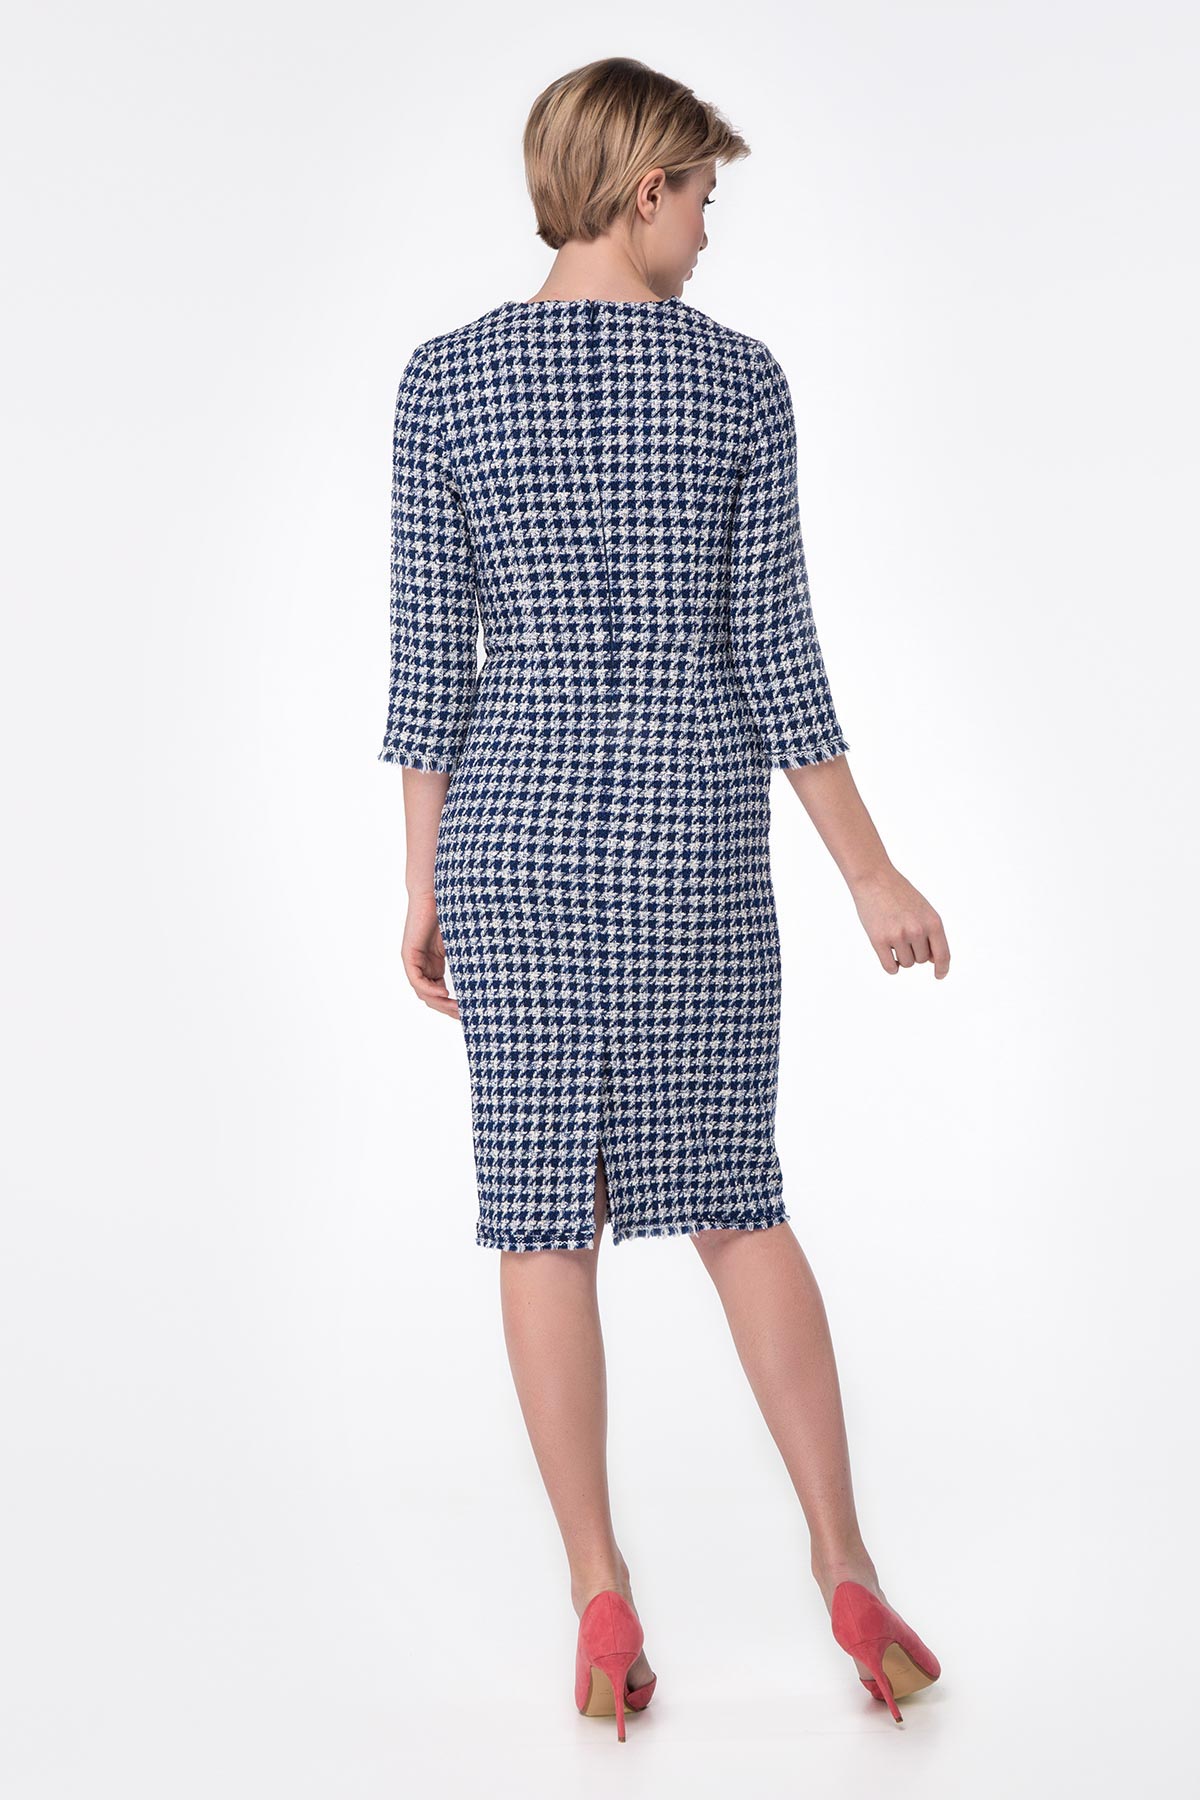 Column dress with blue&white houndstooth print, photo 12